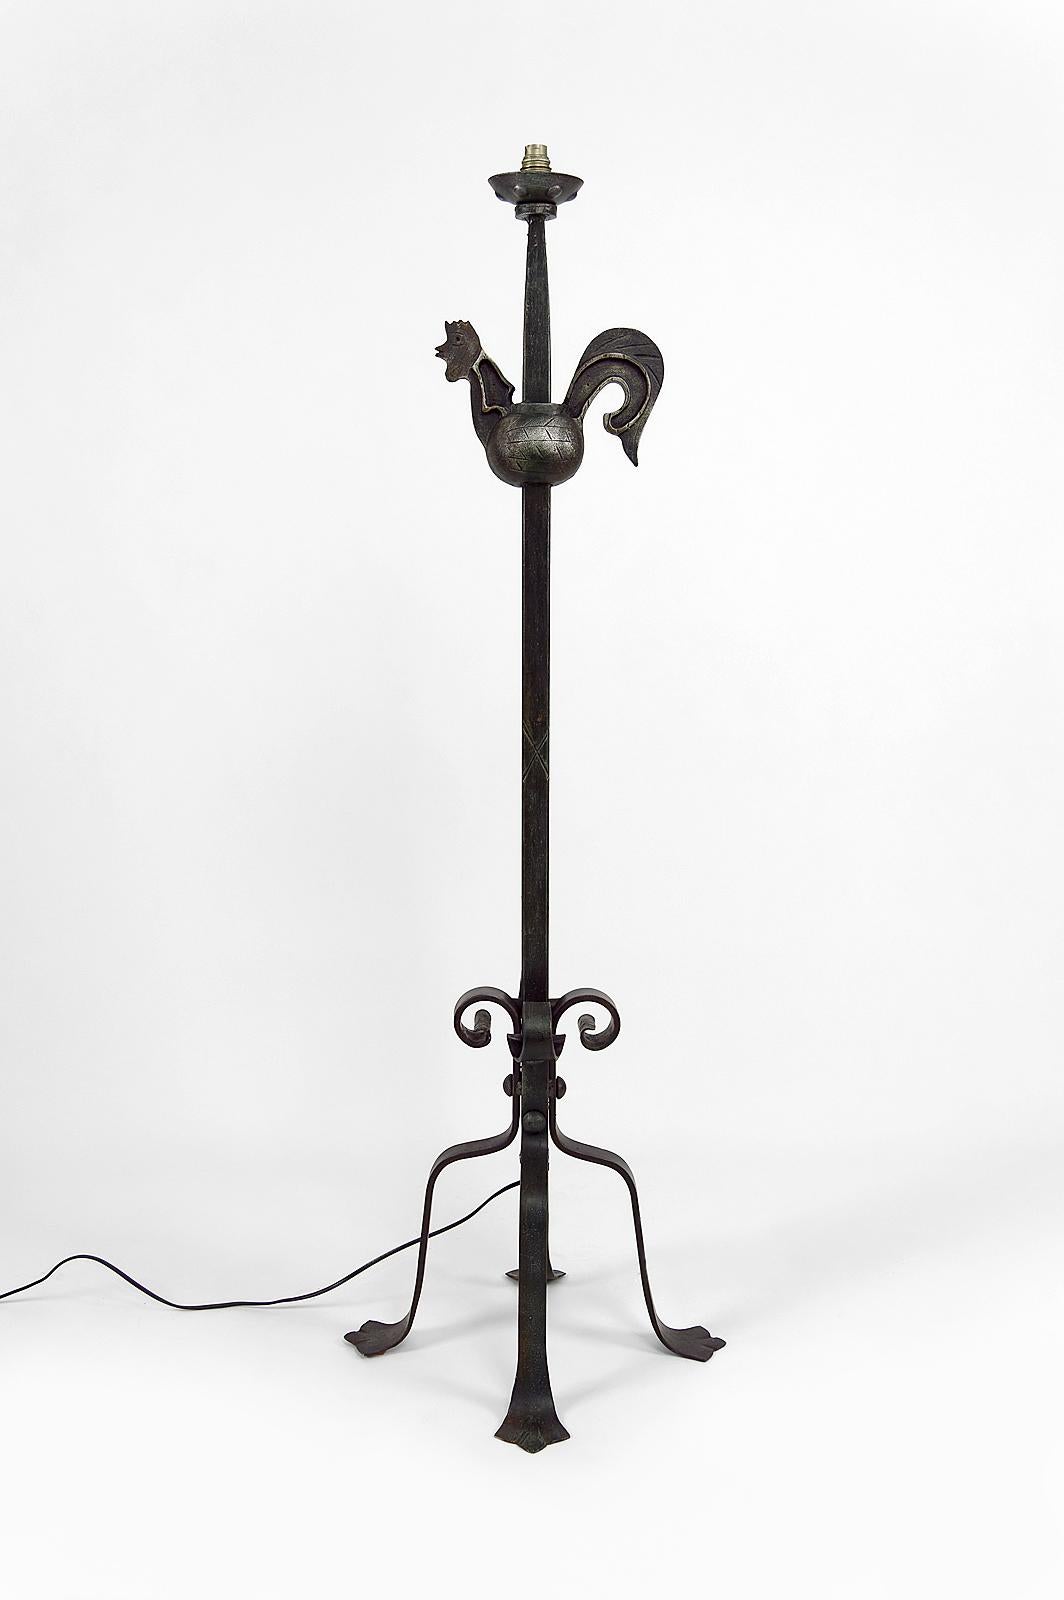 Mid-Century Modern Rooster Floor Lamp in Wrought Iron by Jean Touret for Ateliers Marolles, 1950's For Sale